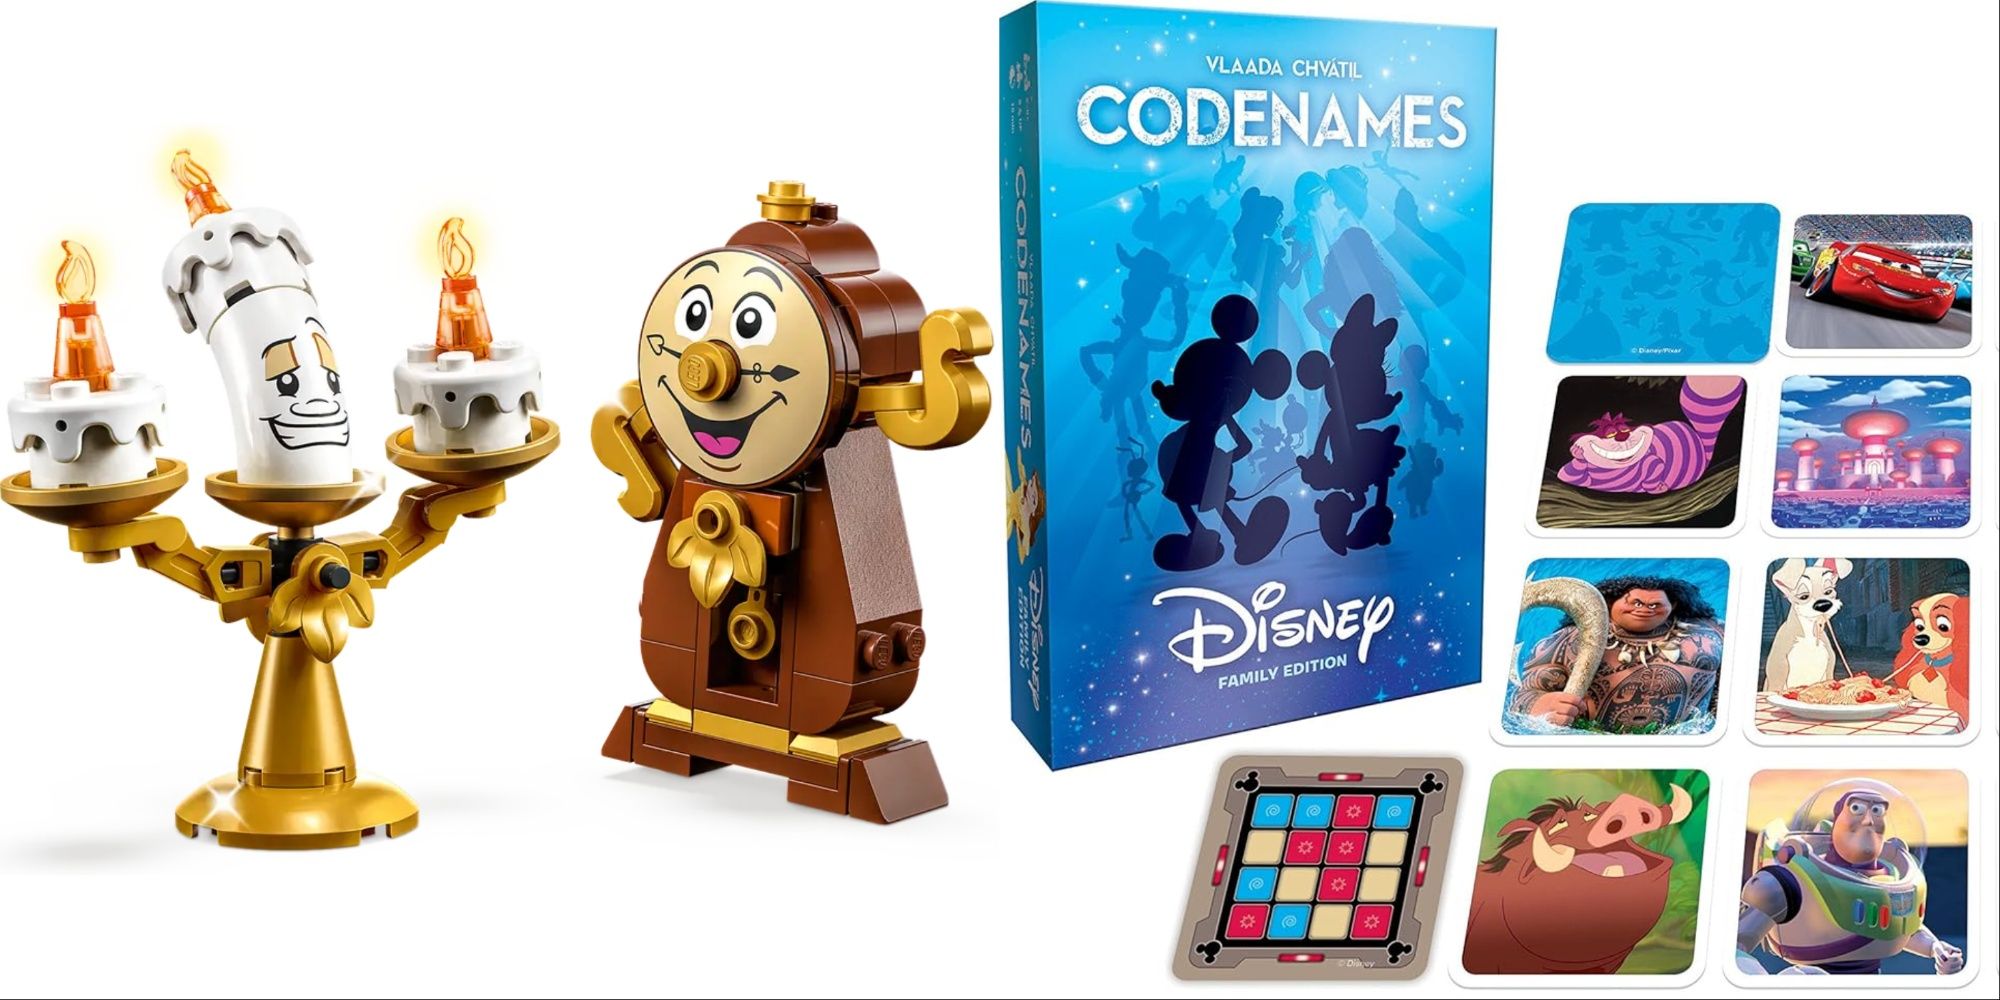 Best Disney Gifts Featured Split Image Of Disney Duos Lego and Disney Codenames